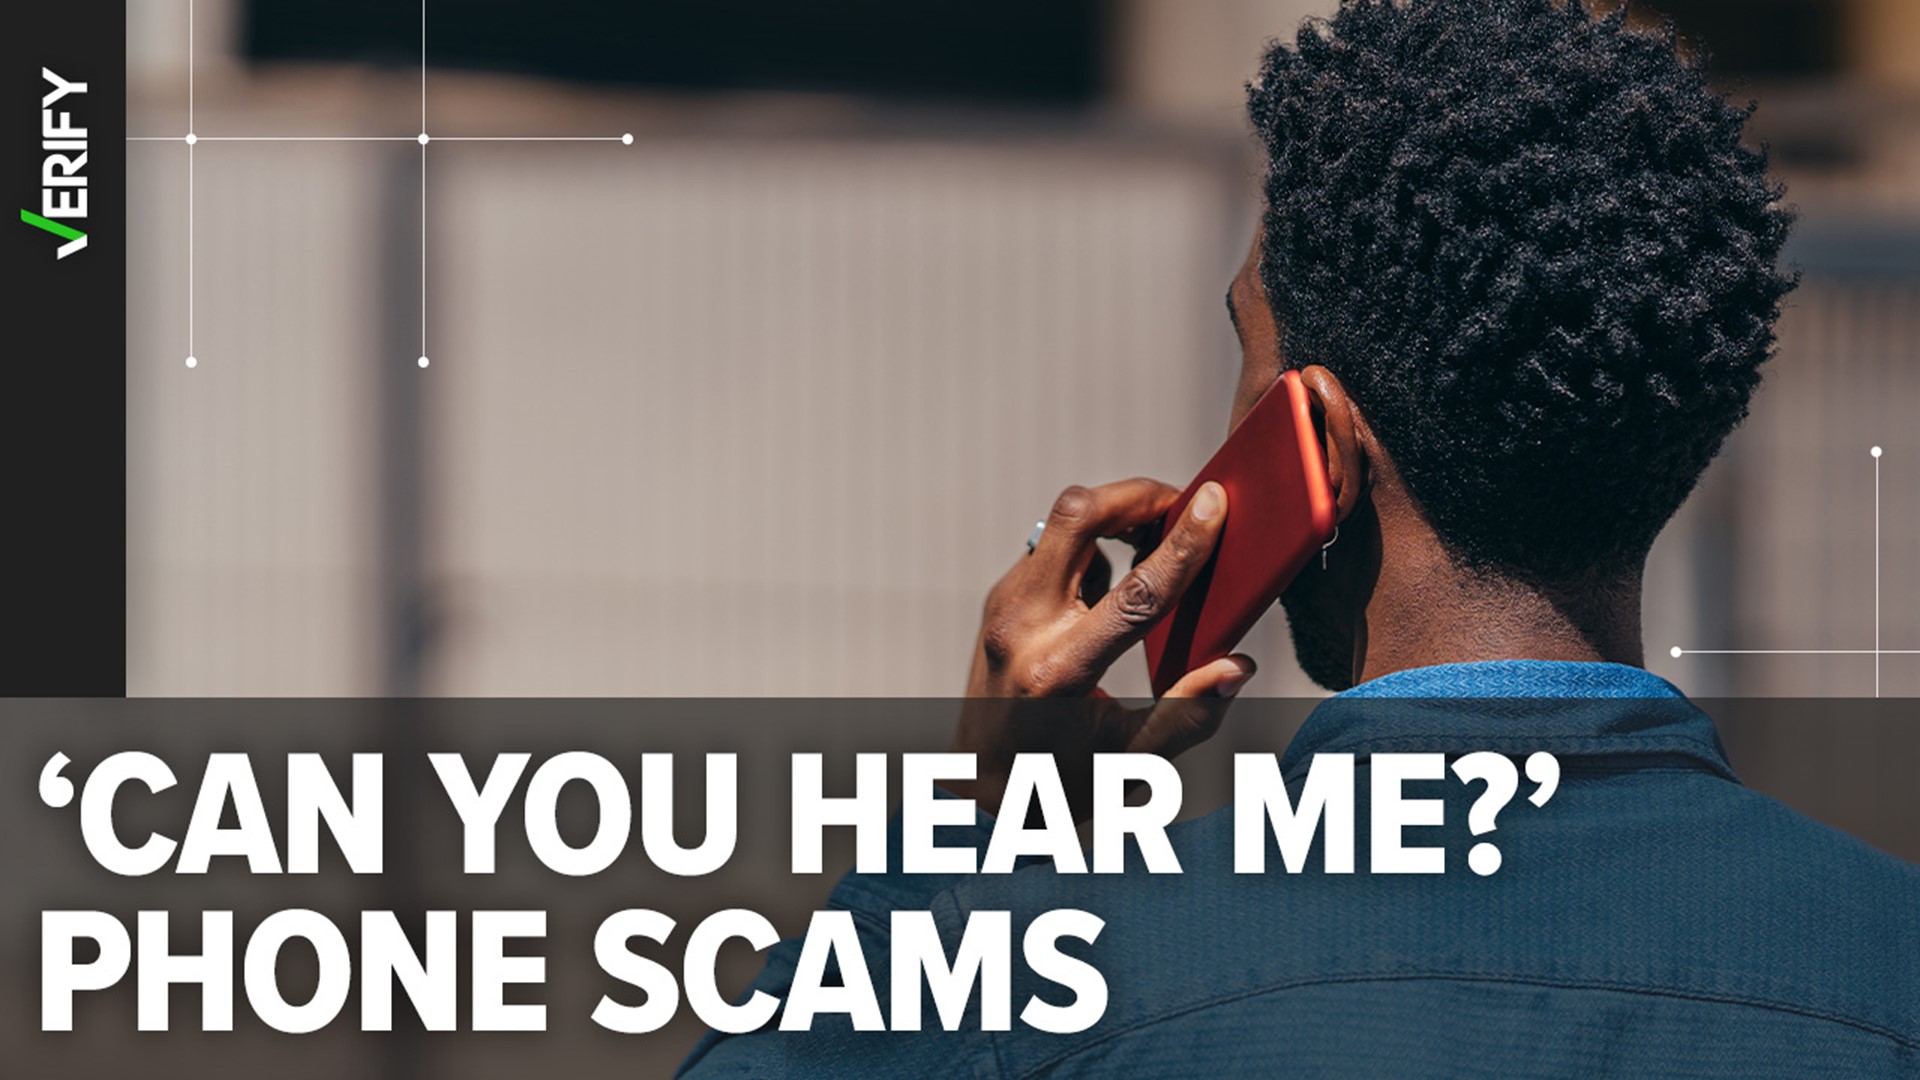 We VERIFY what you need to know about this common robocall.